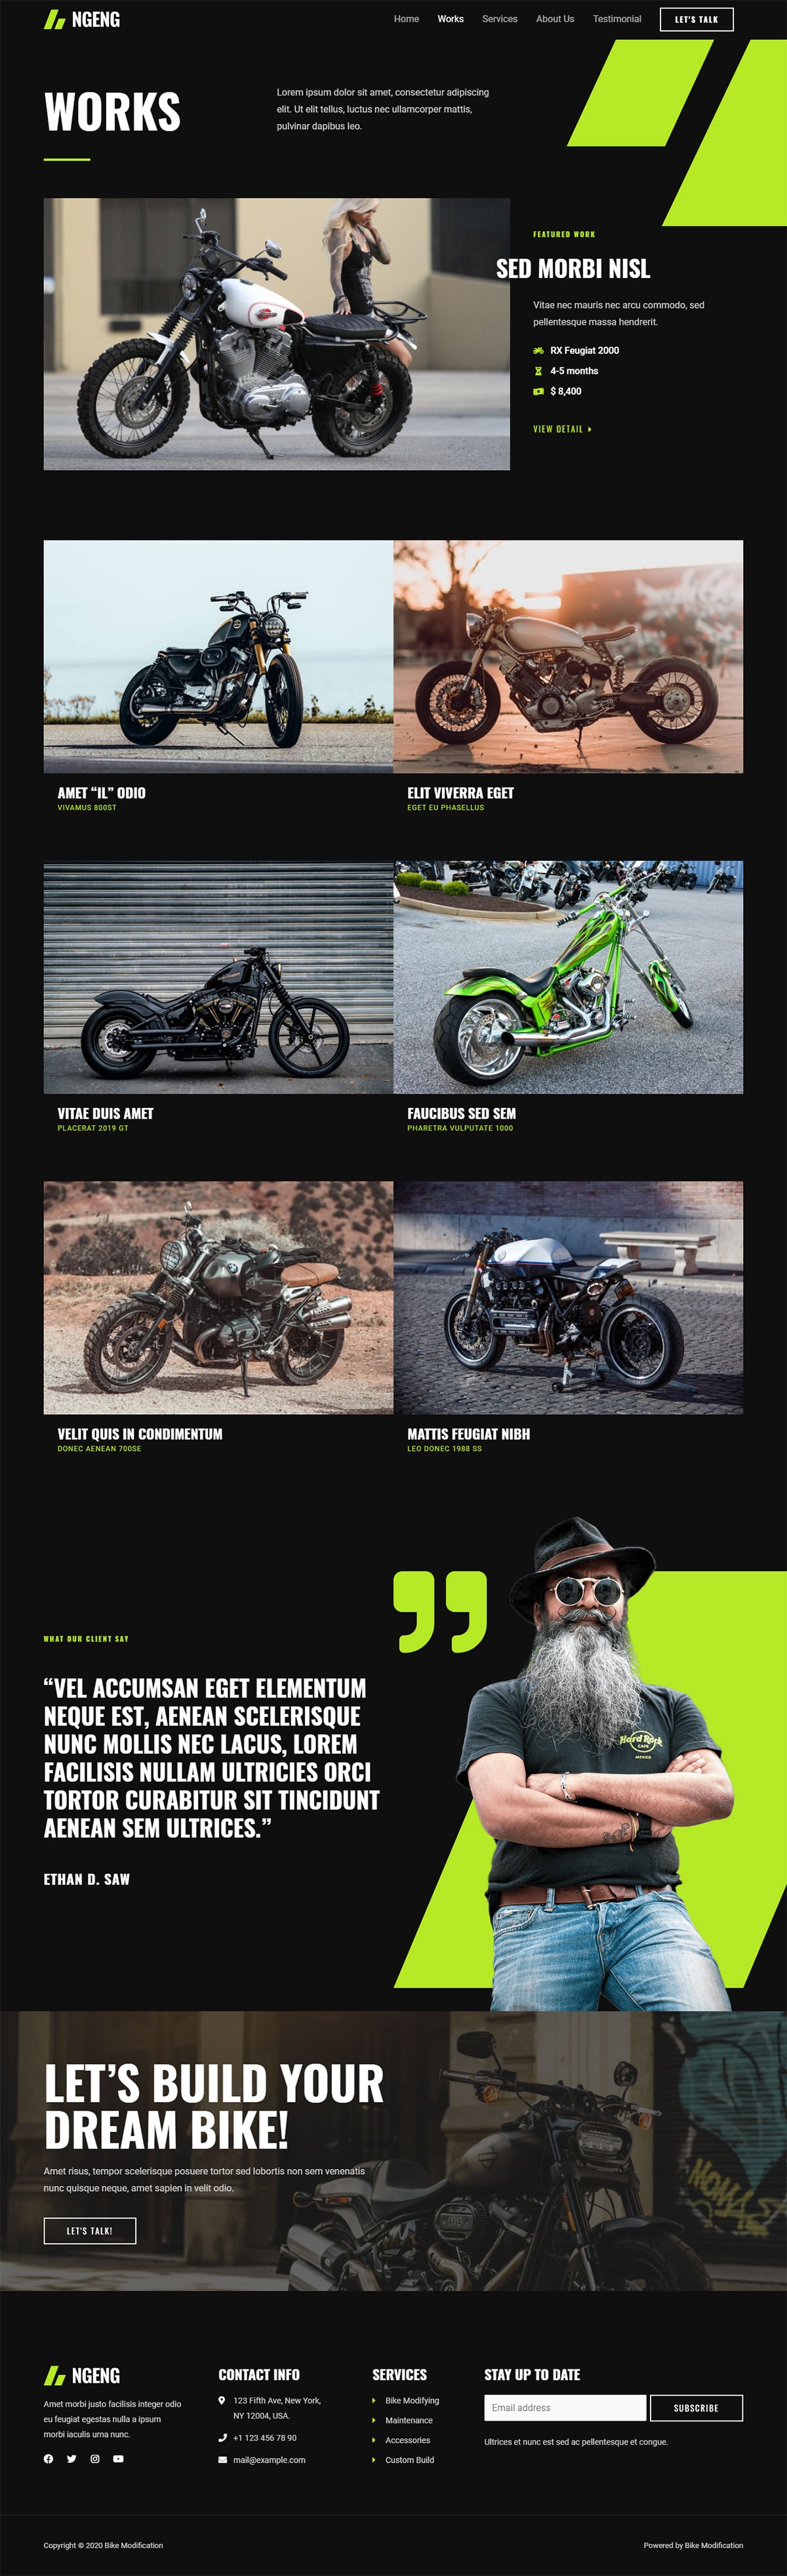 Bike Modification – Website template that dares to be dark